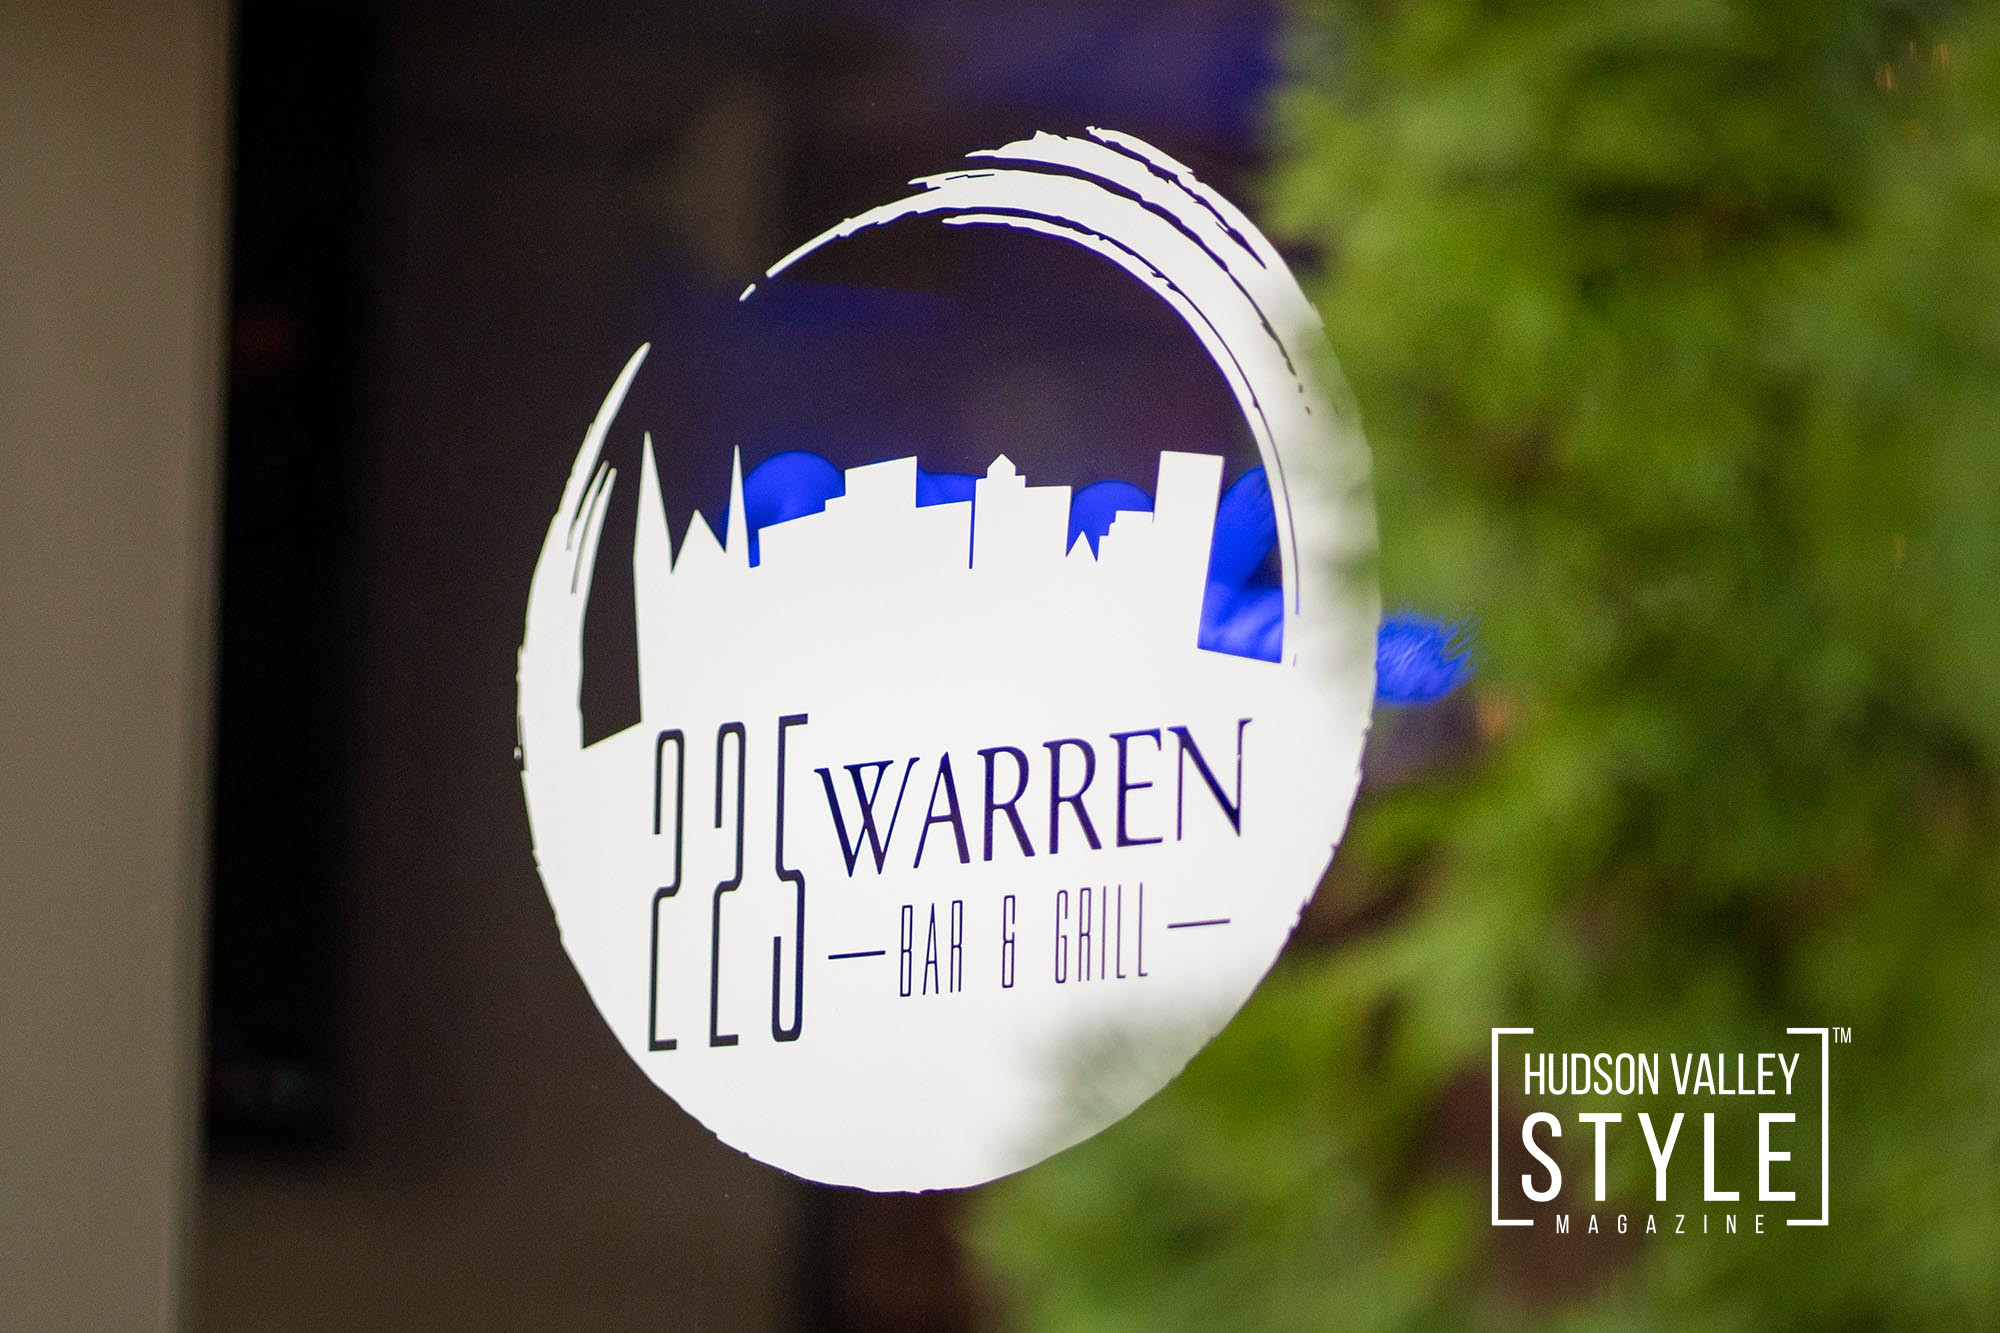 Spring into Flavor at 225 Warren: A Hudson, NY Photo Gallery + Restaurant Review by Photographer Maxwell Alexander – Presented by Alluvion Vacations